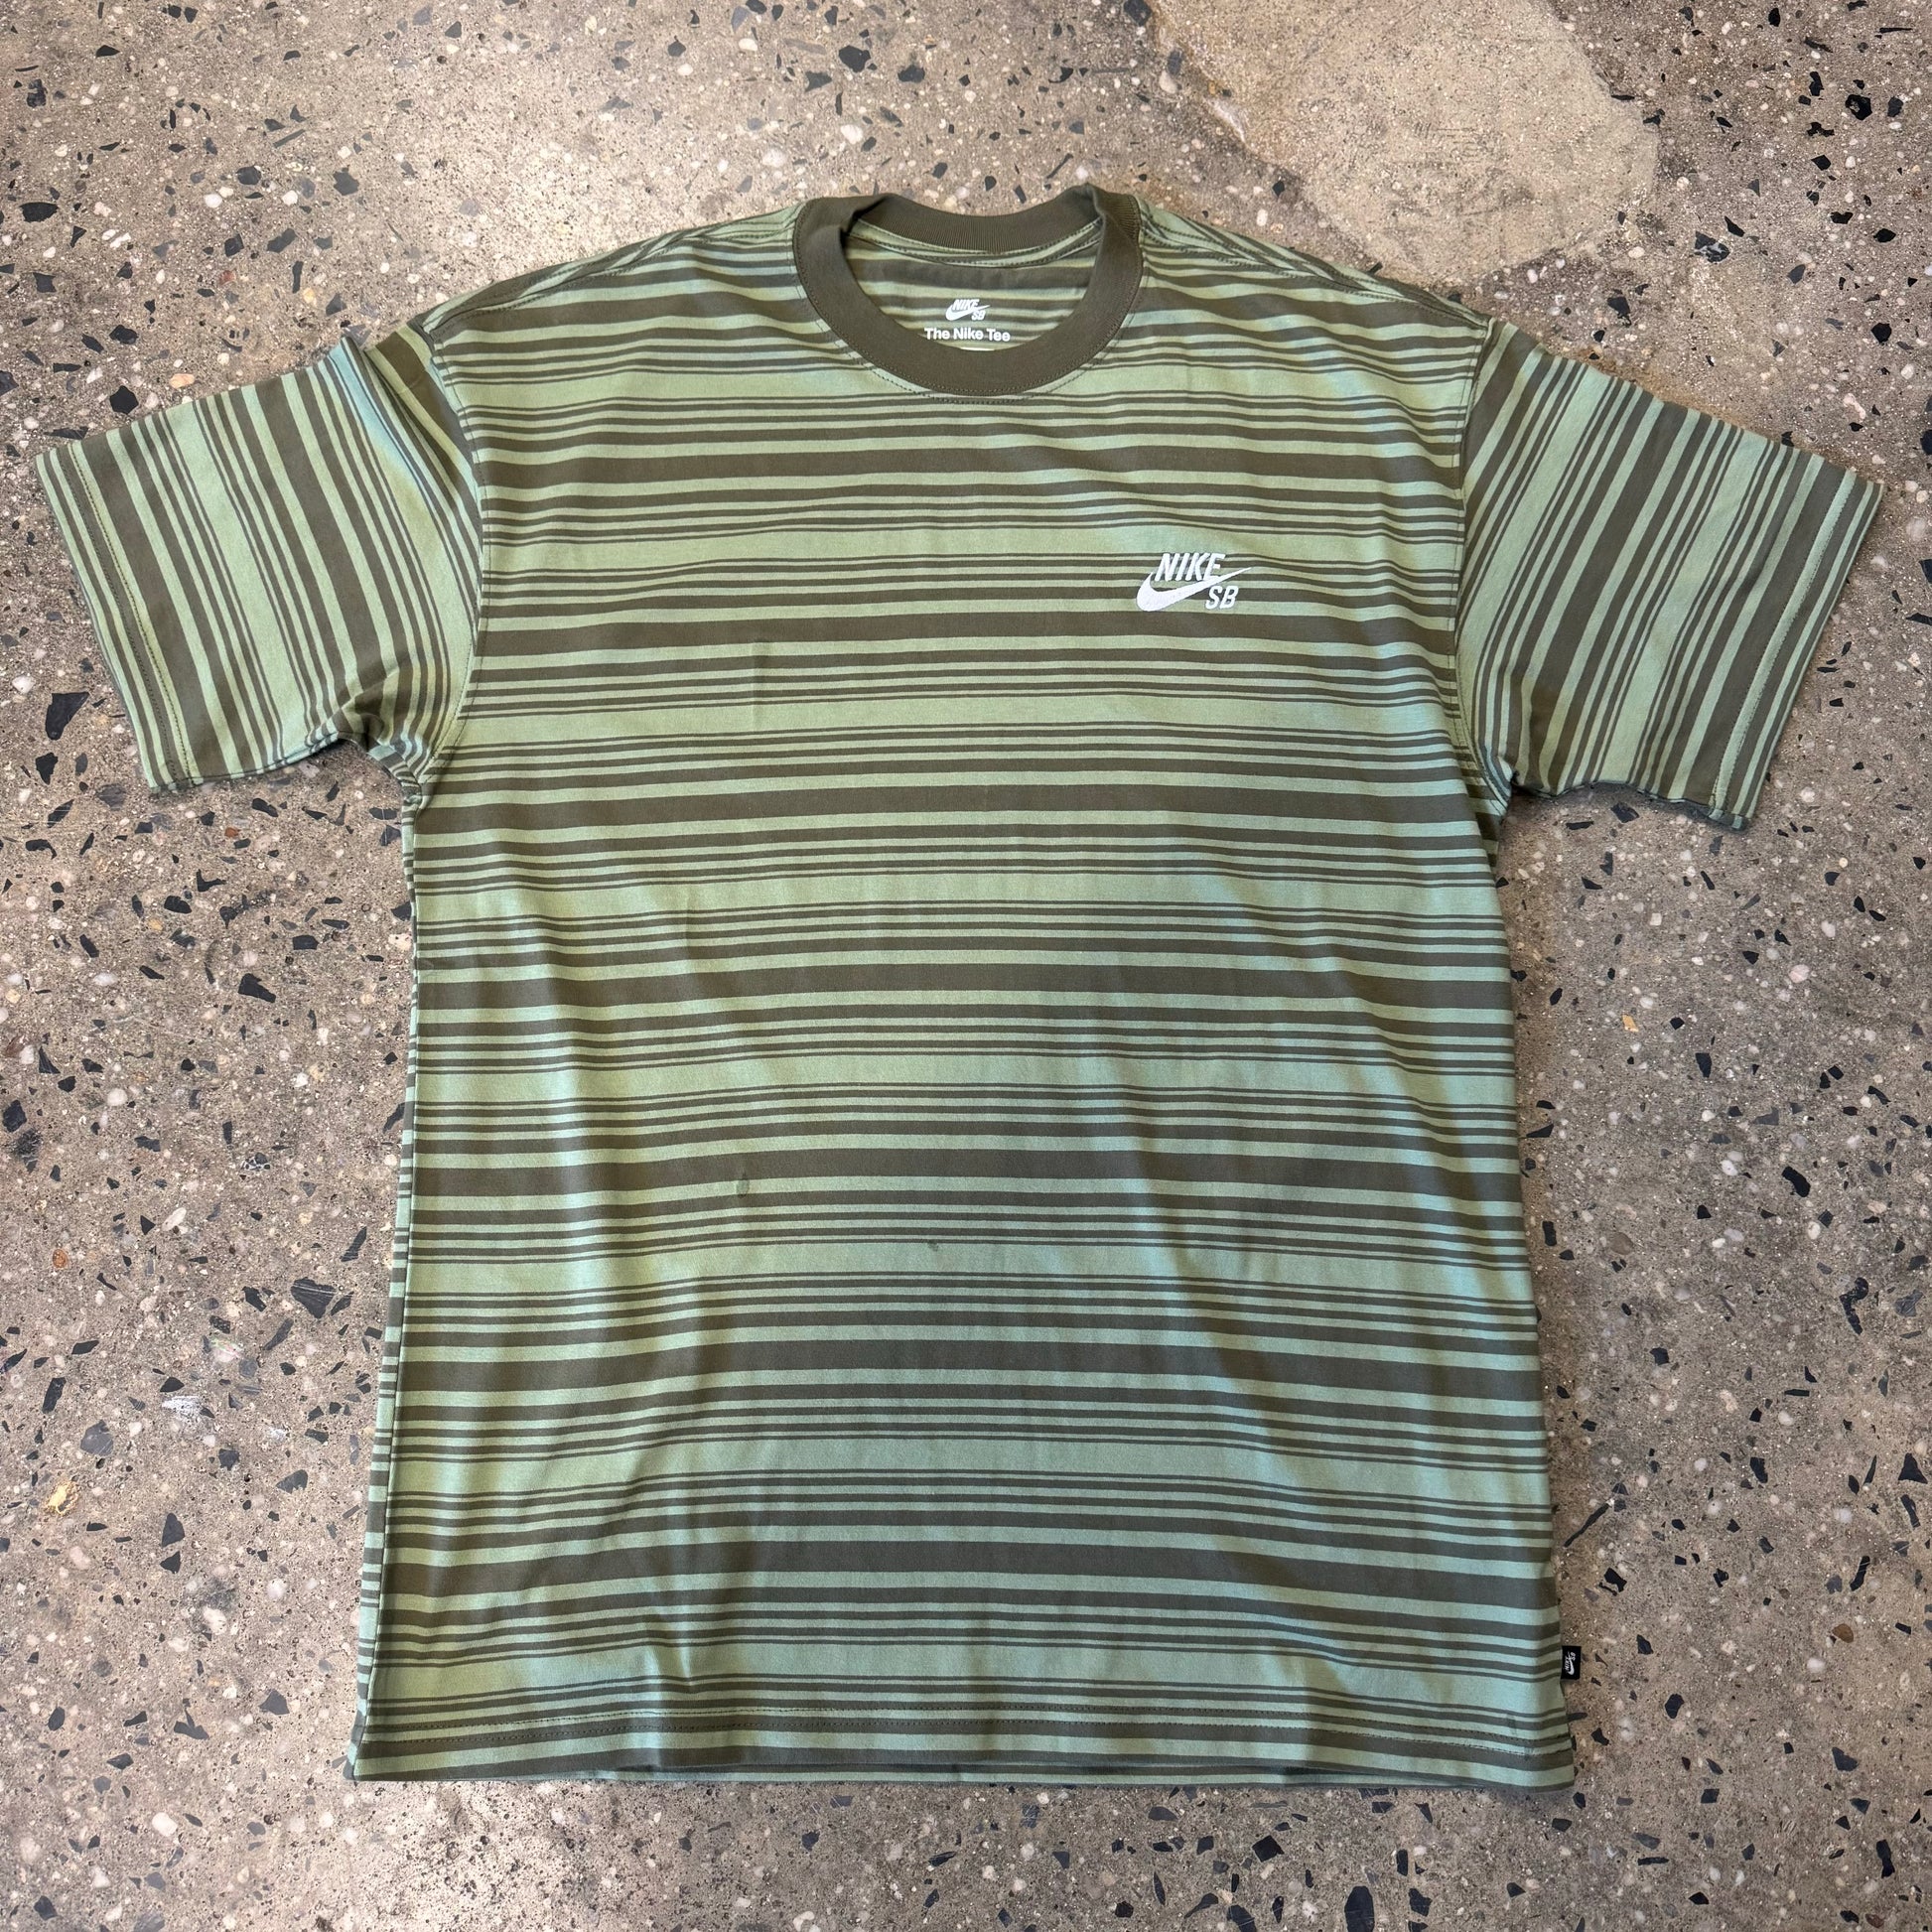 green striped T-shirt with white logo